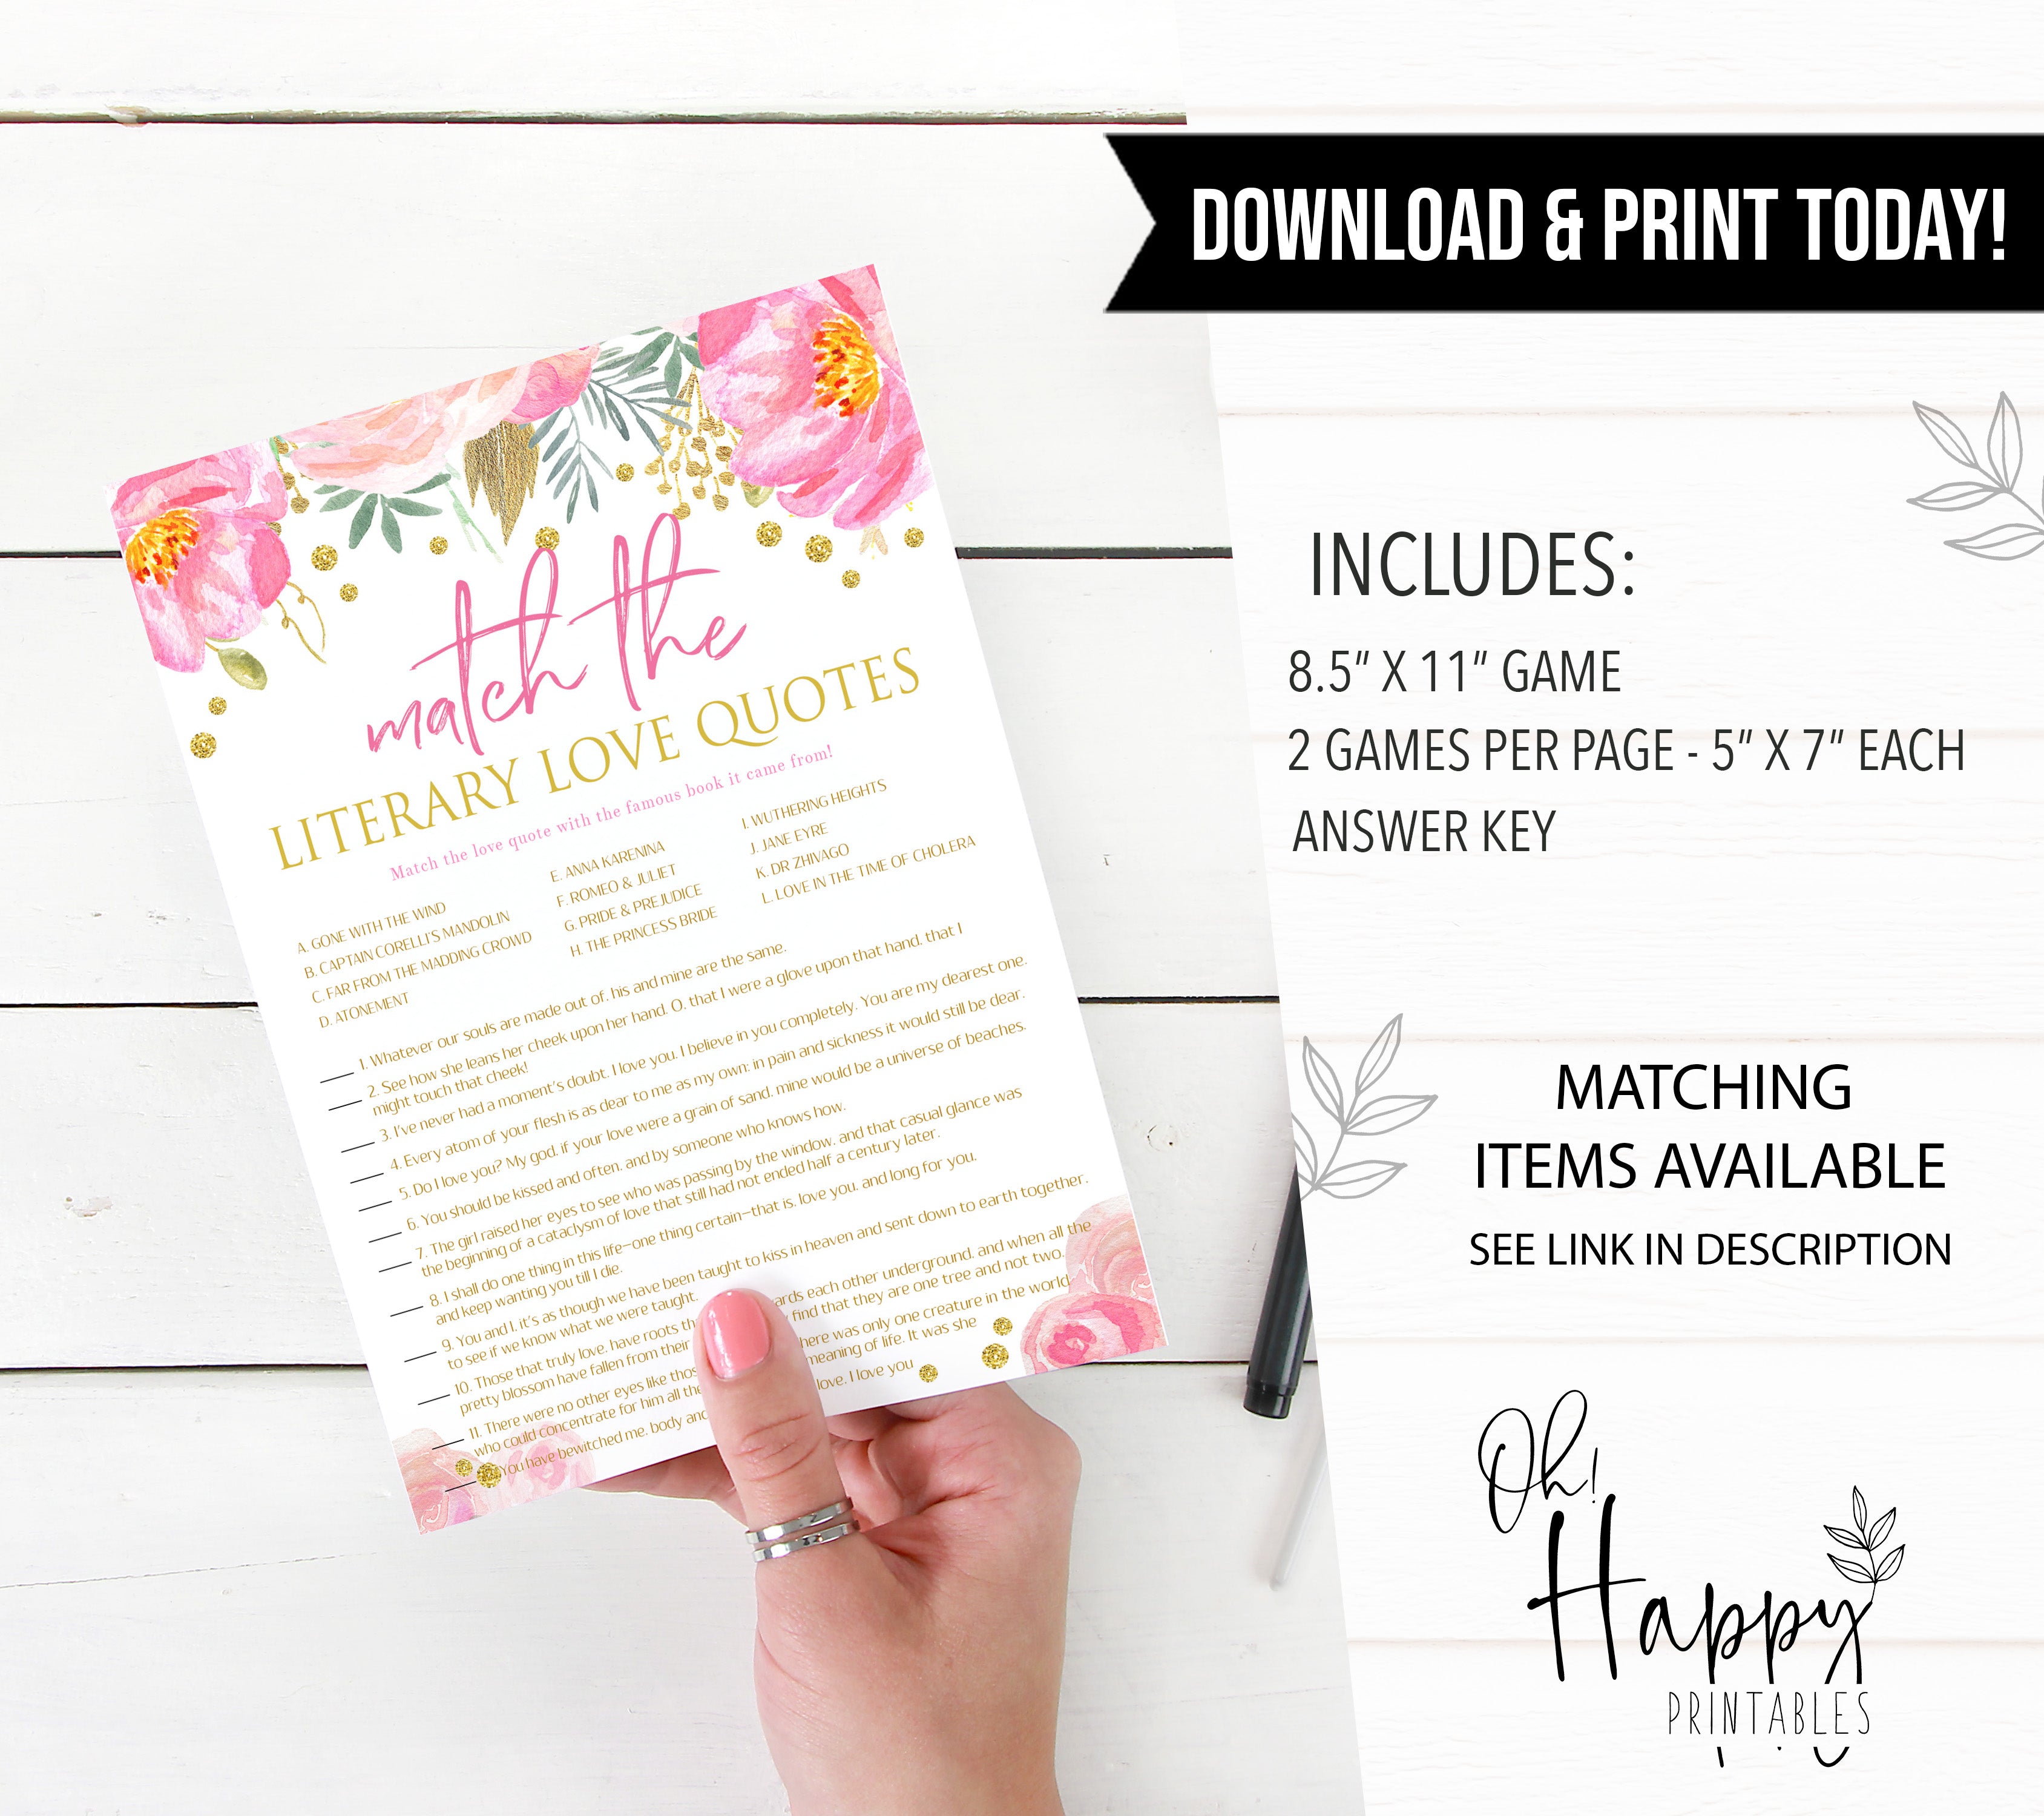 literary love quotes, printable bridal shower games, blush floral bridal shower games, fun bridal shower games